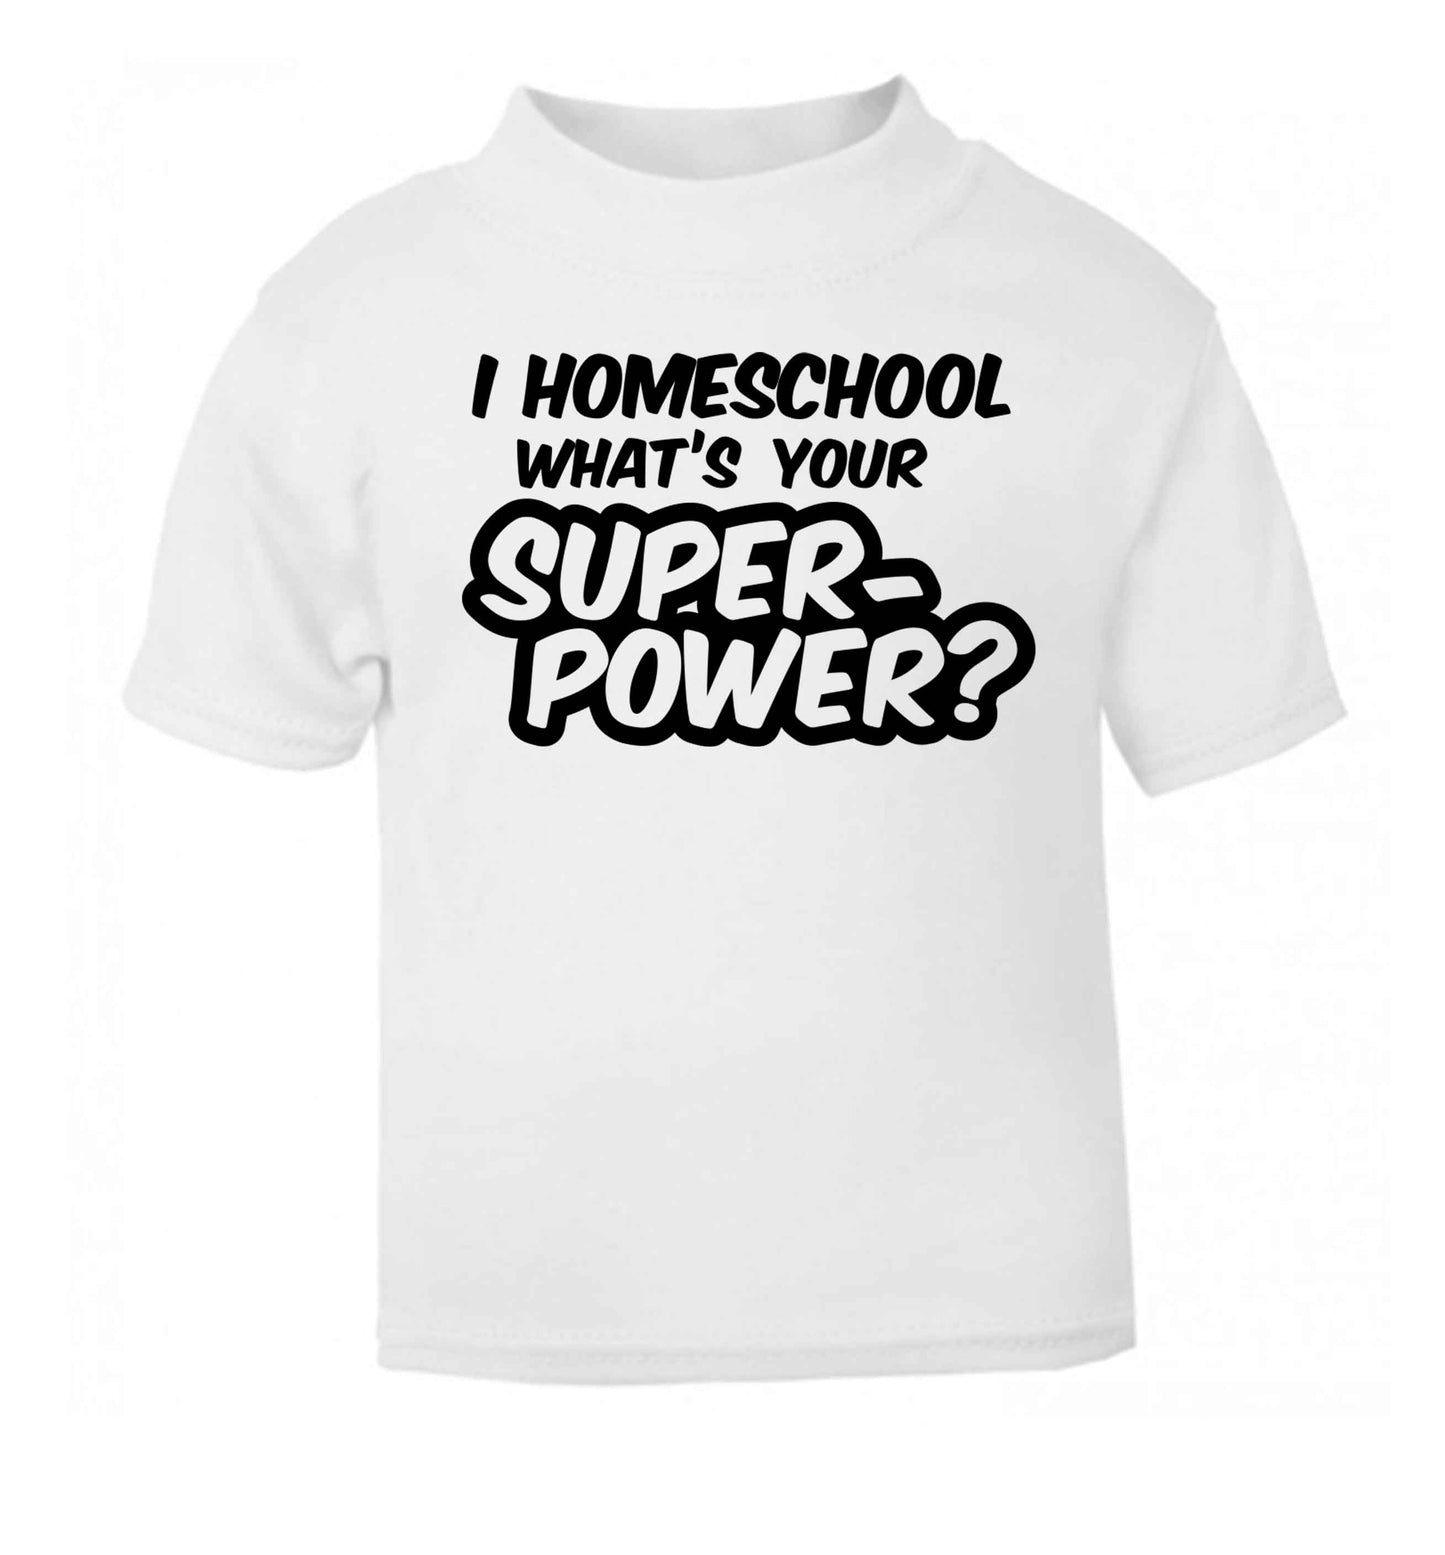 I homeschool what's your superpower? white Baby Toddler Tshirt 2 Years